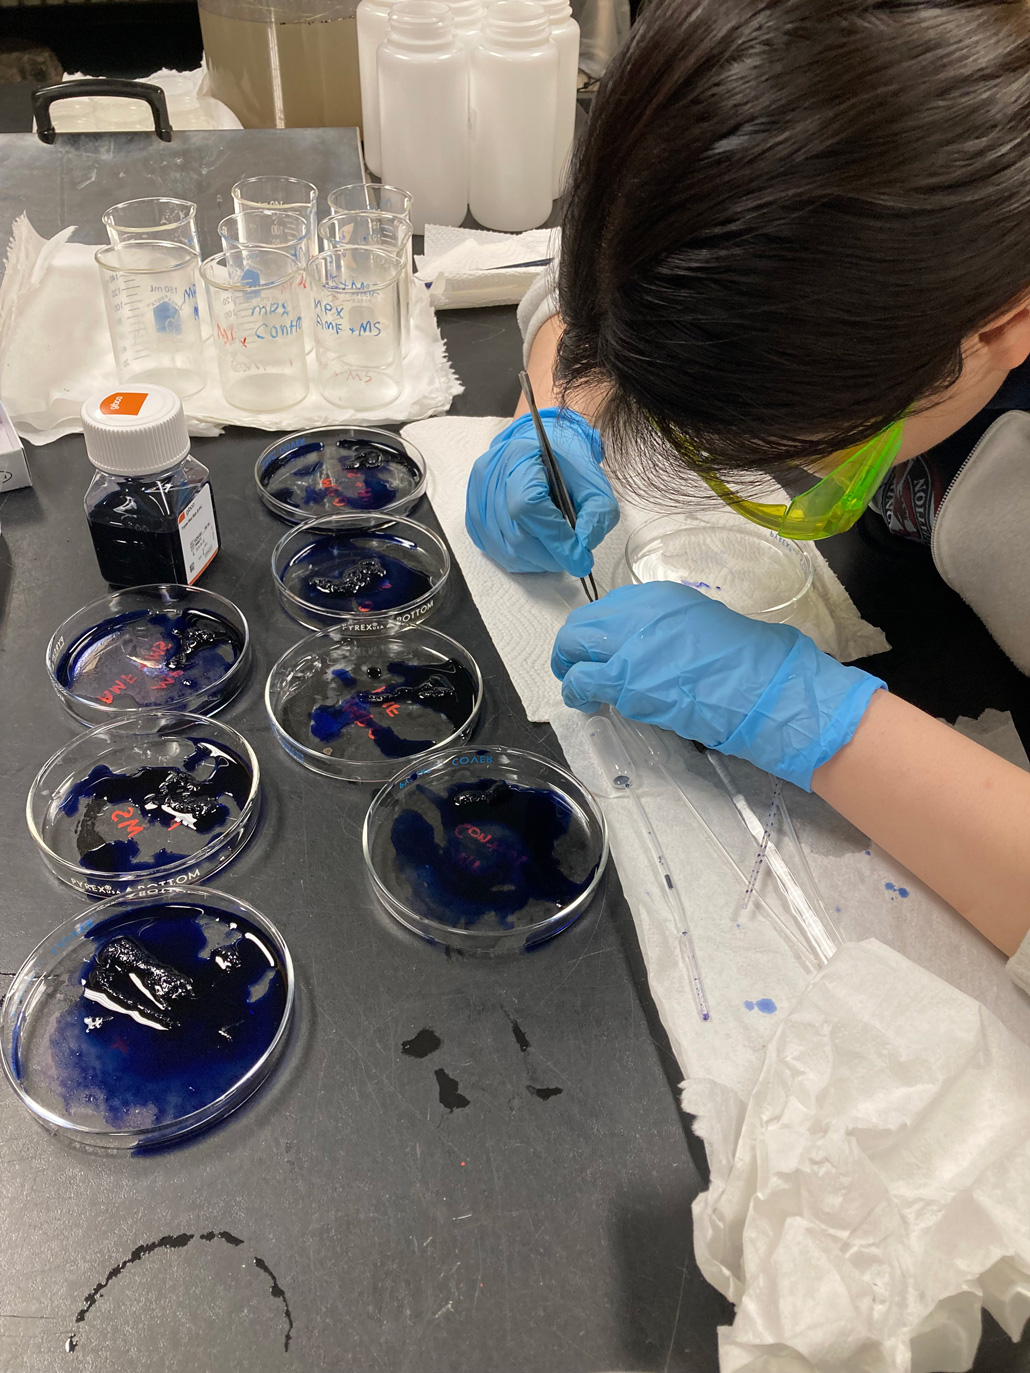 a photo of a young woman bent over petri plates staining them blue